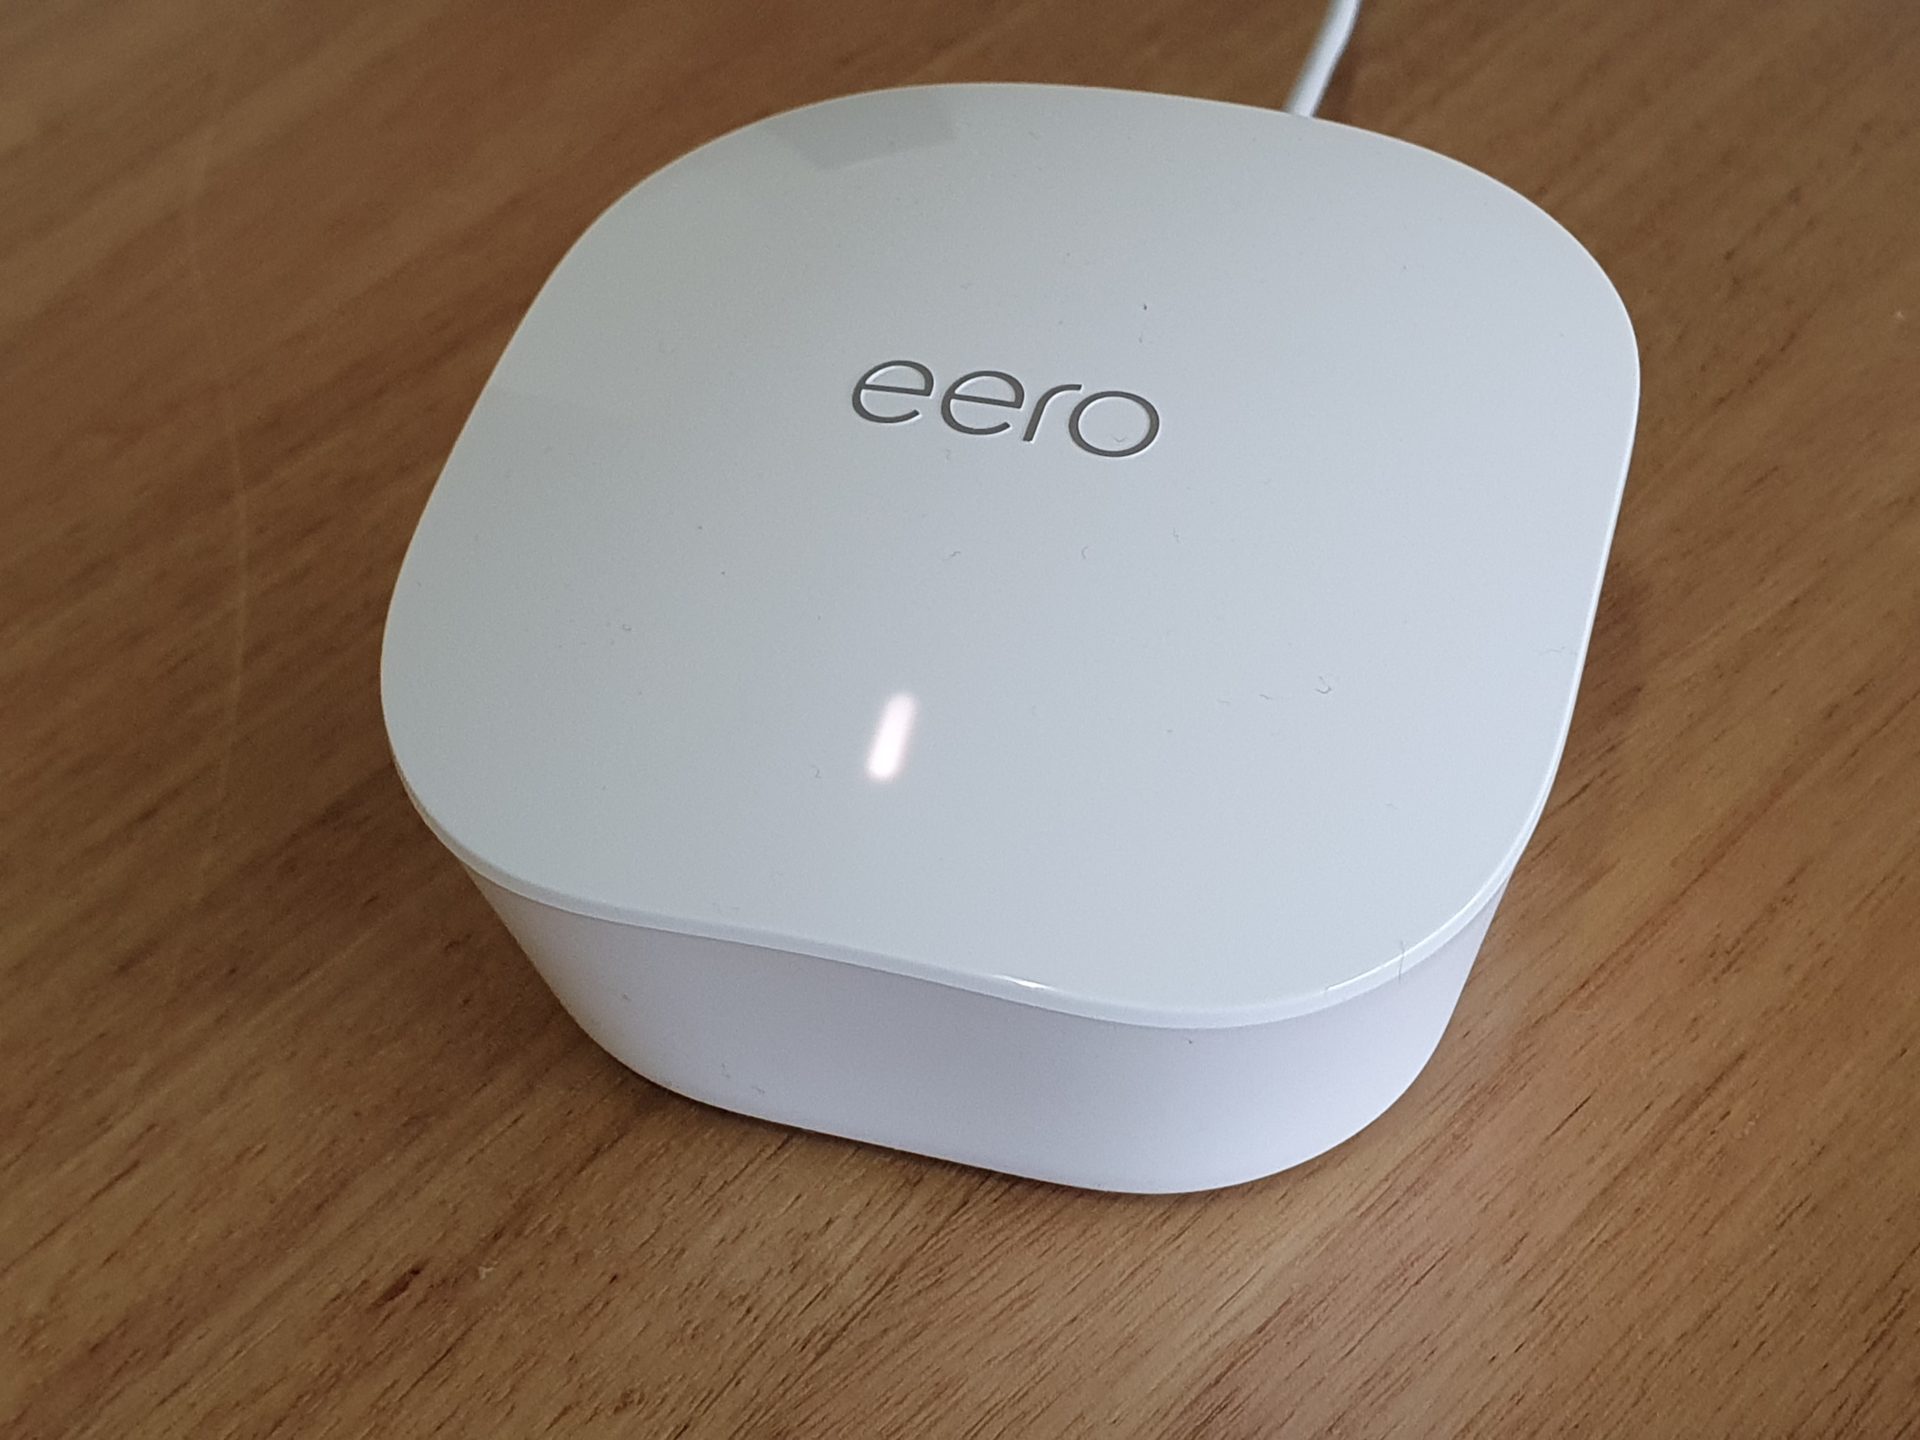 ring puts an eero router its